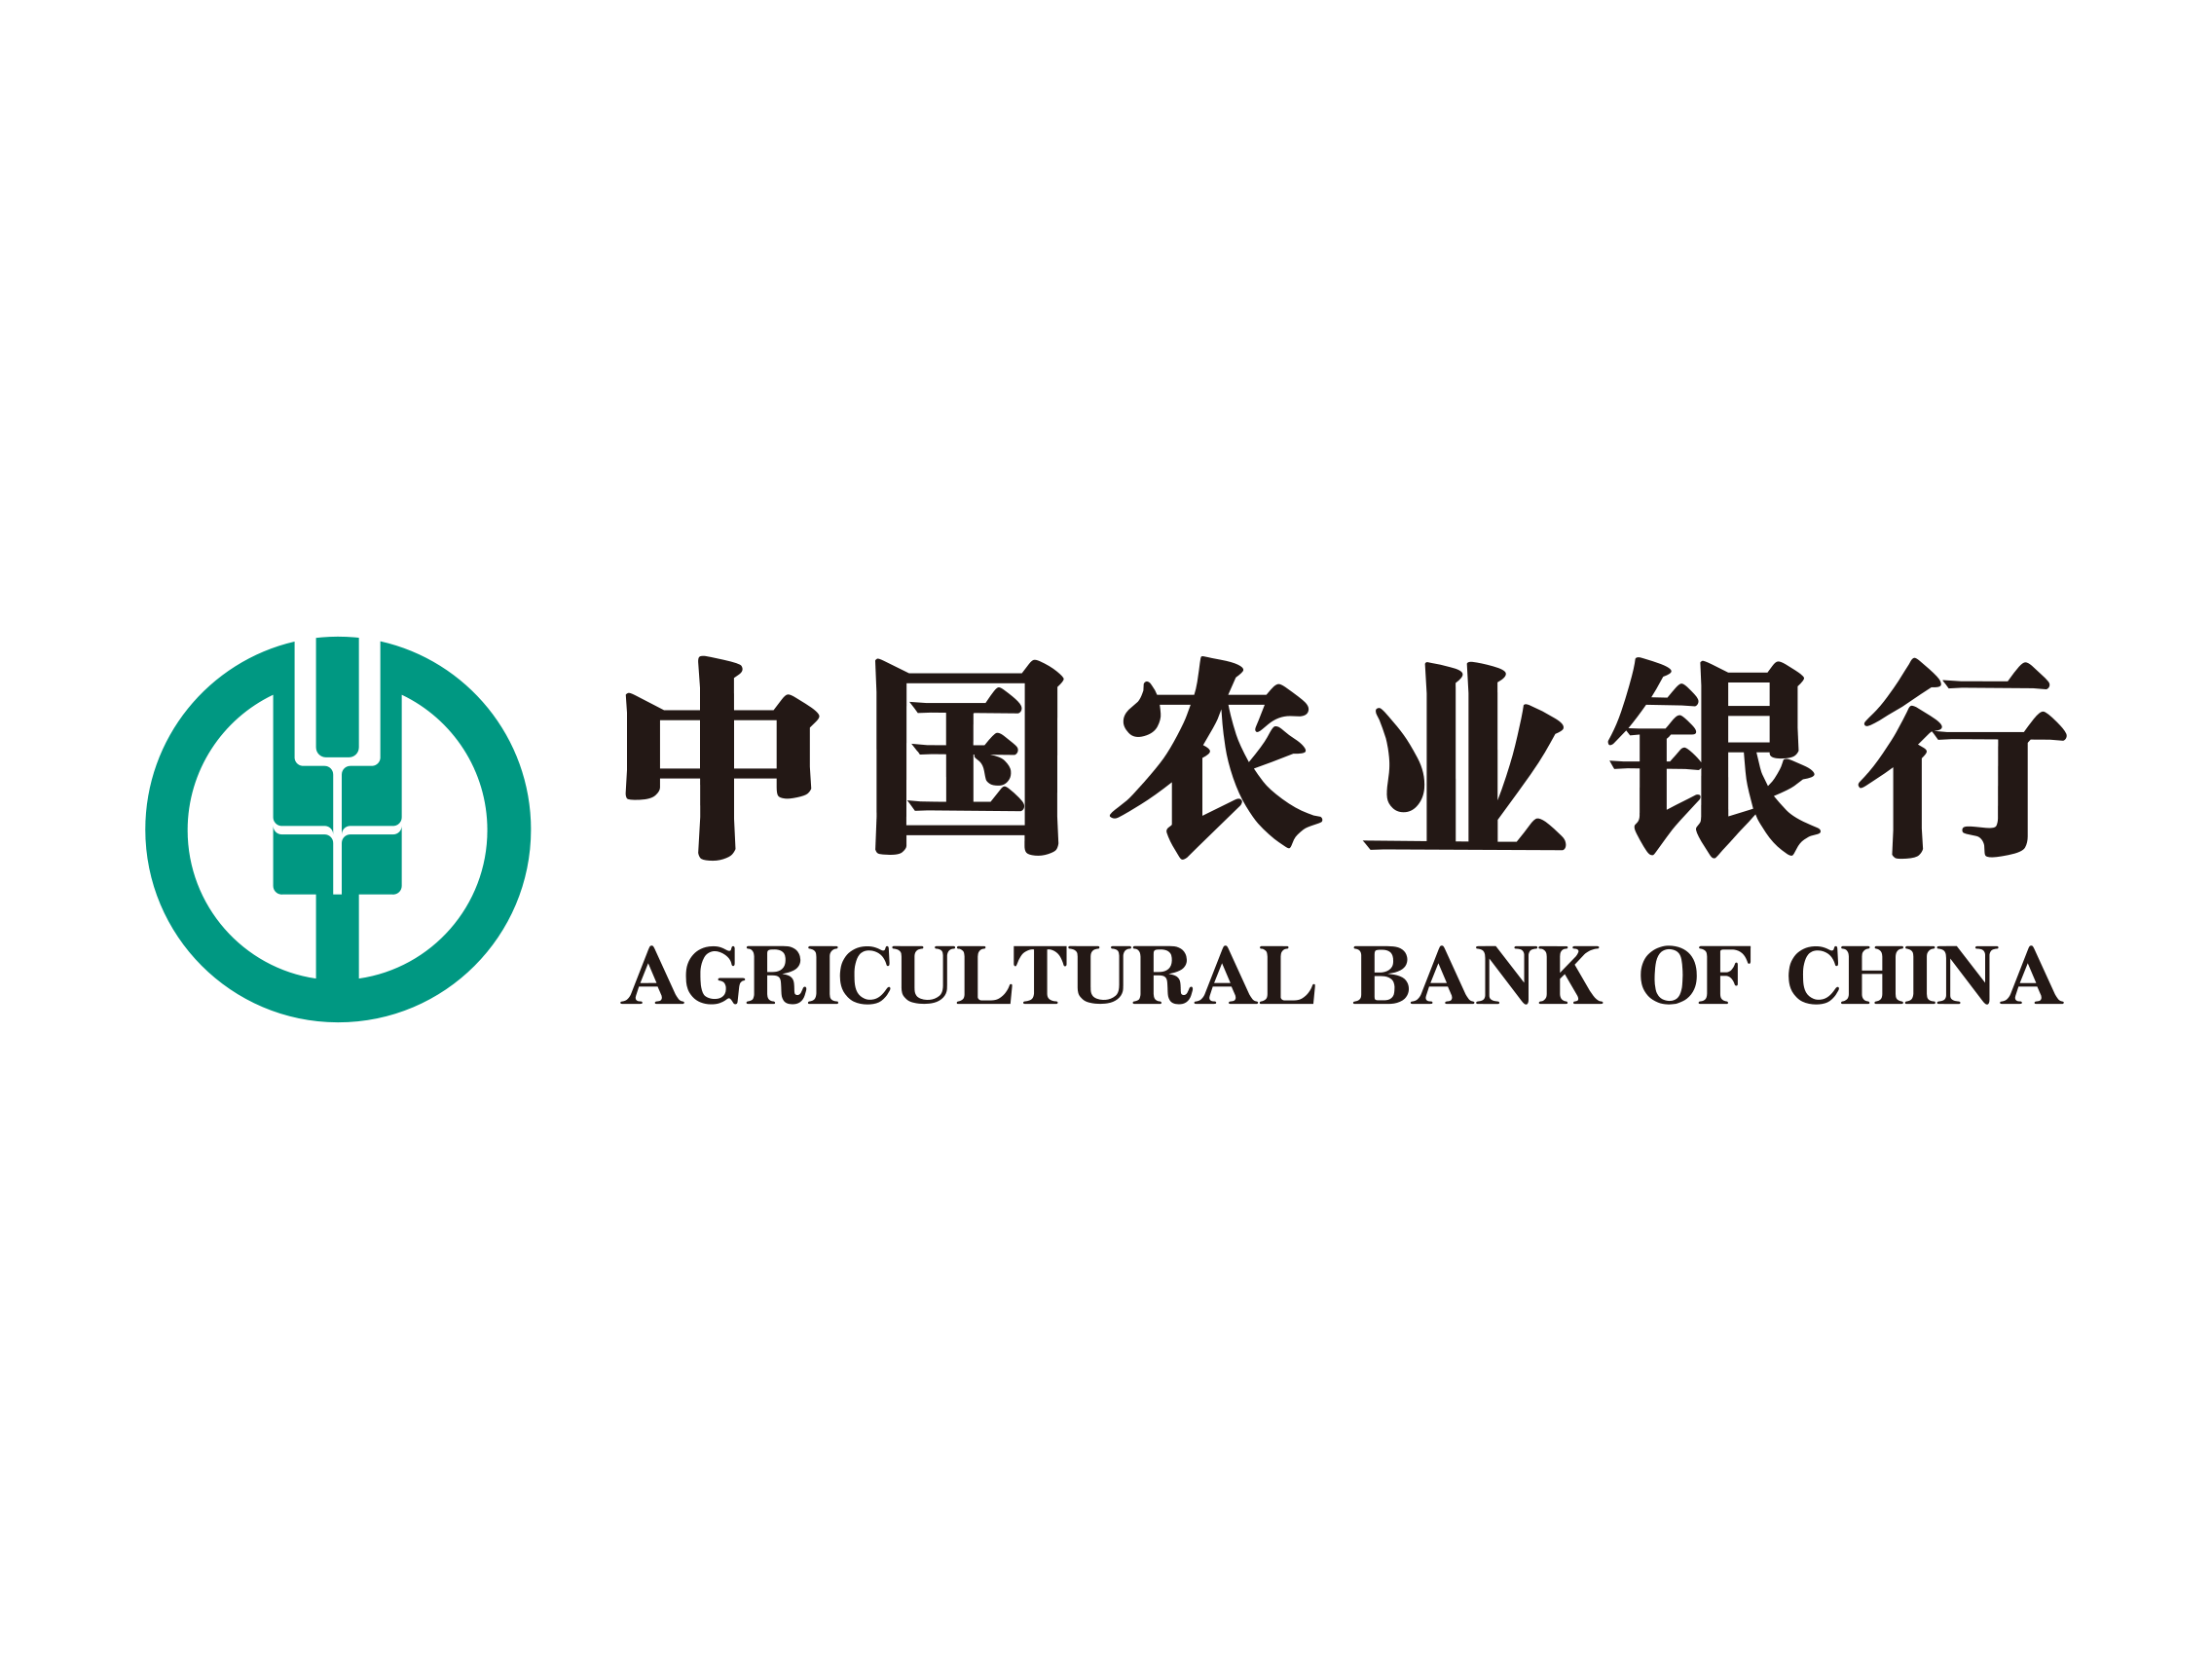 Agricultural Bank of China, L